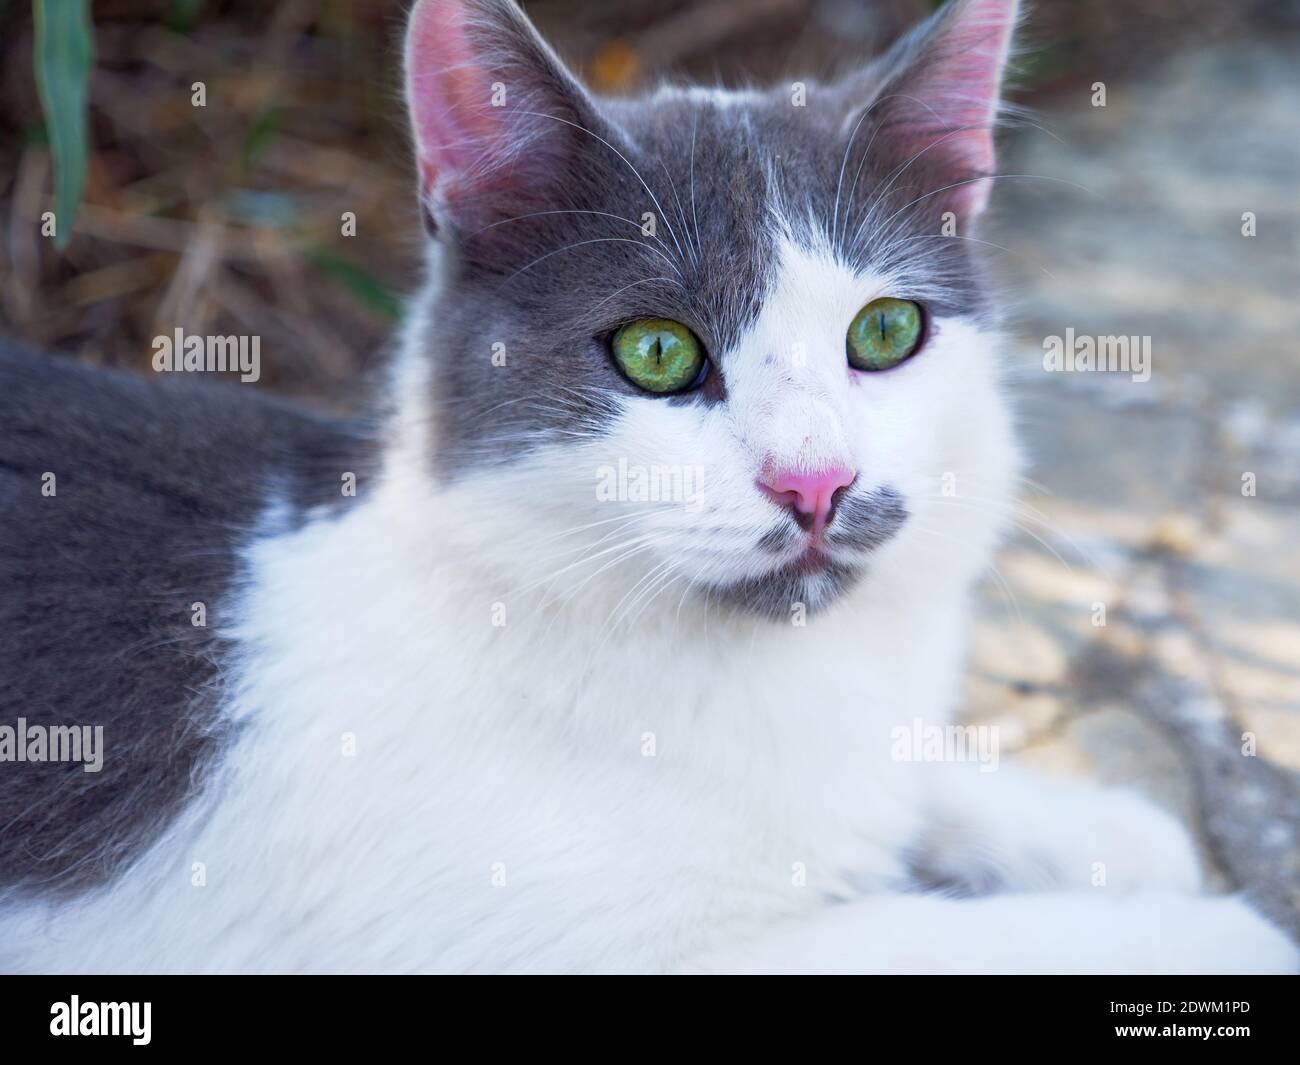 Closeup portrait of a beautiful non-pedigree tabby white and grey cat with bright green eyes and pink ears and nose having rest outdoors. Stock Photo